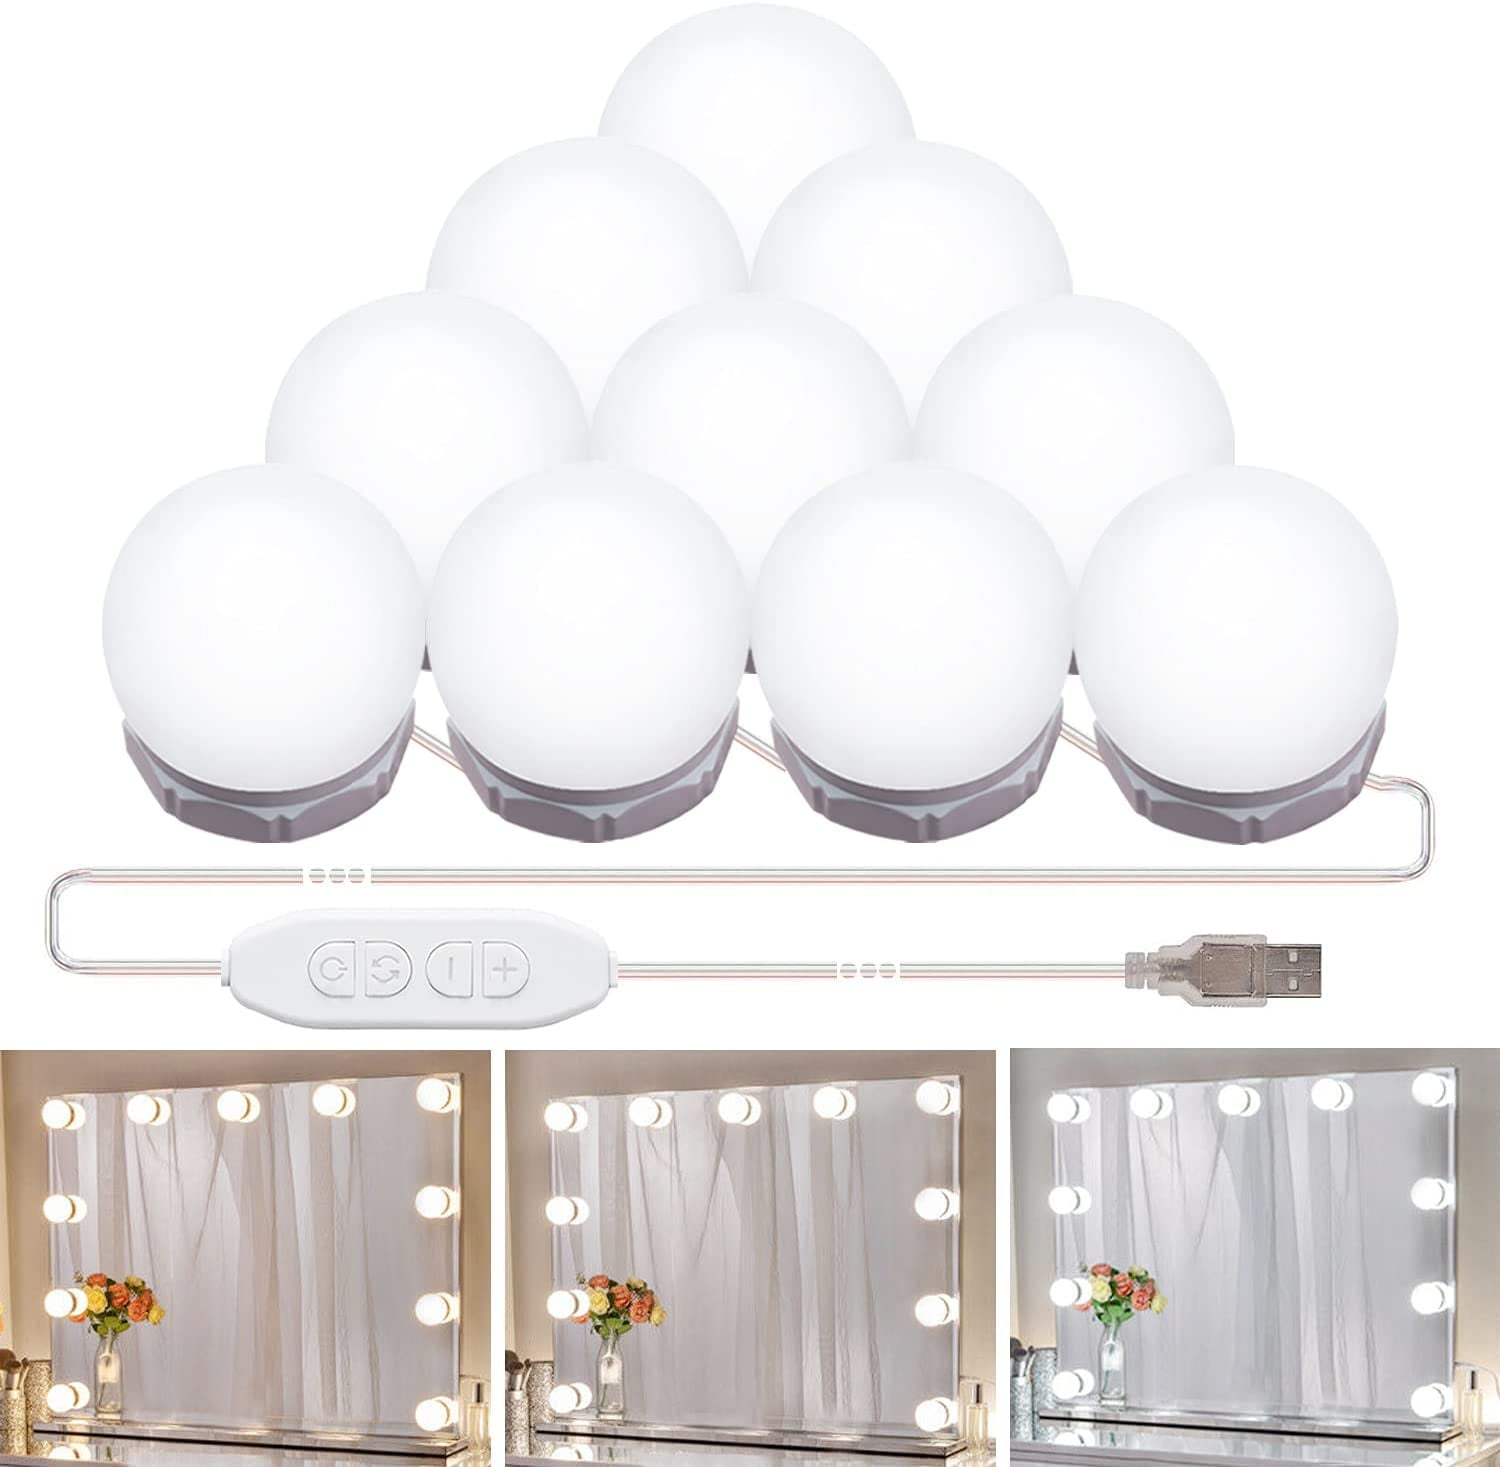 Hollywood Mirror Lights Vanity Light with USB Power Cord,Stick-on LED Makeup Mirror Lights for Dressing Table Bath Girls Bedroom Decor,10 Dimmable Bulbs with 3 Color 10 Levels Brightness 